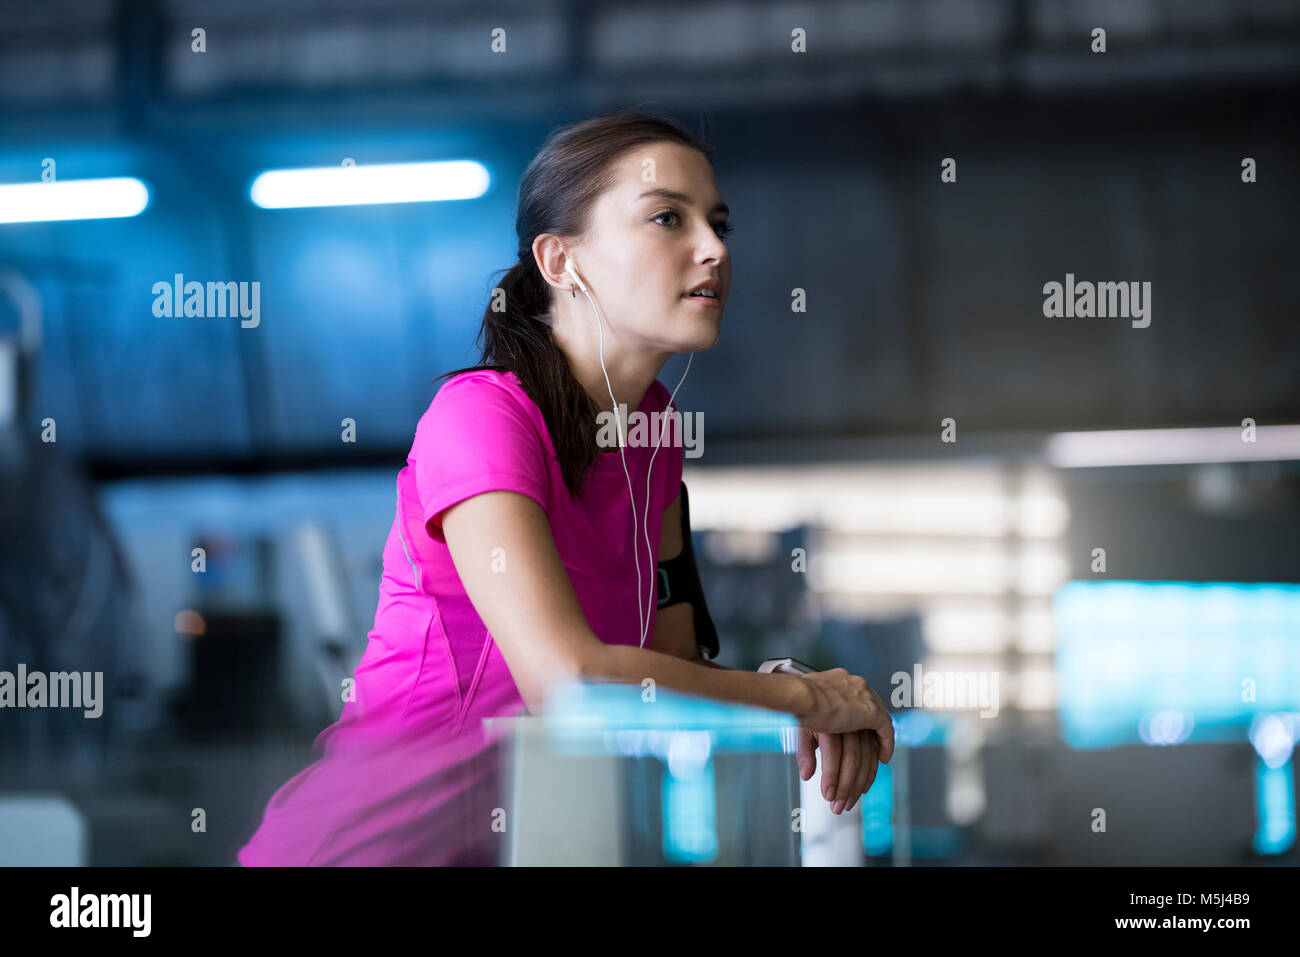 Young woman in pink sport shirt listening to music Stock Photo